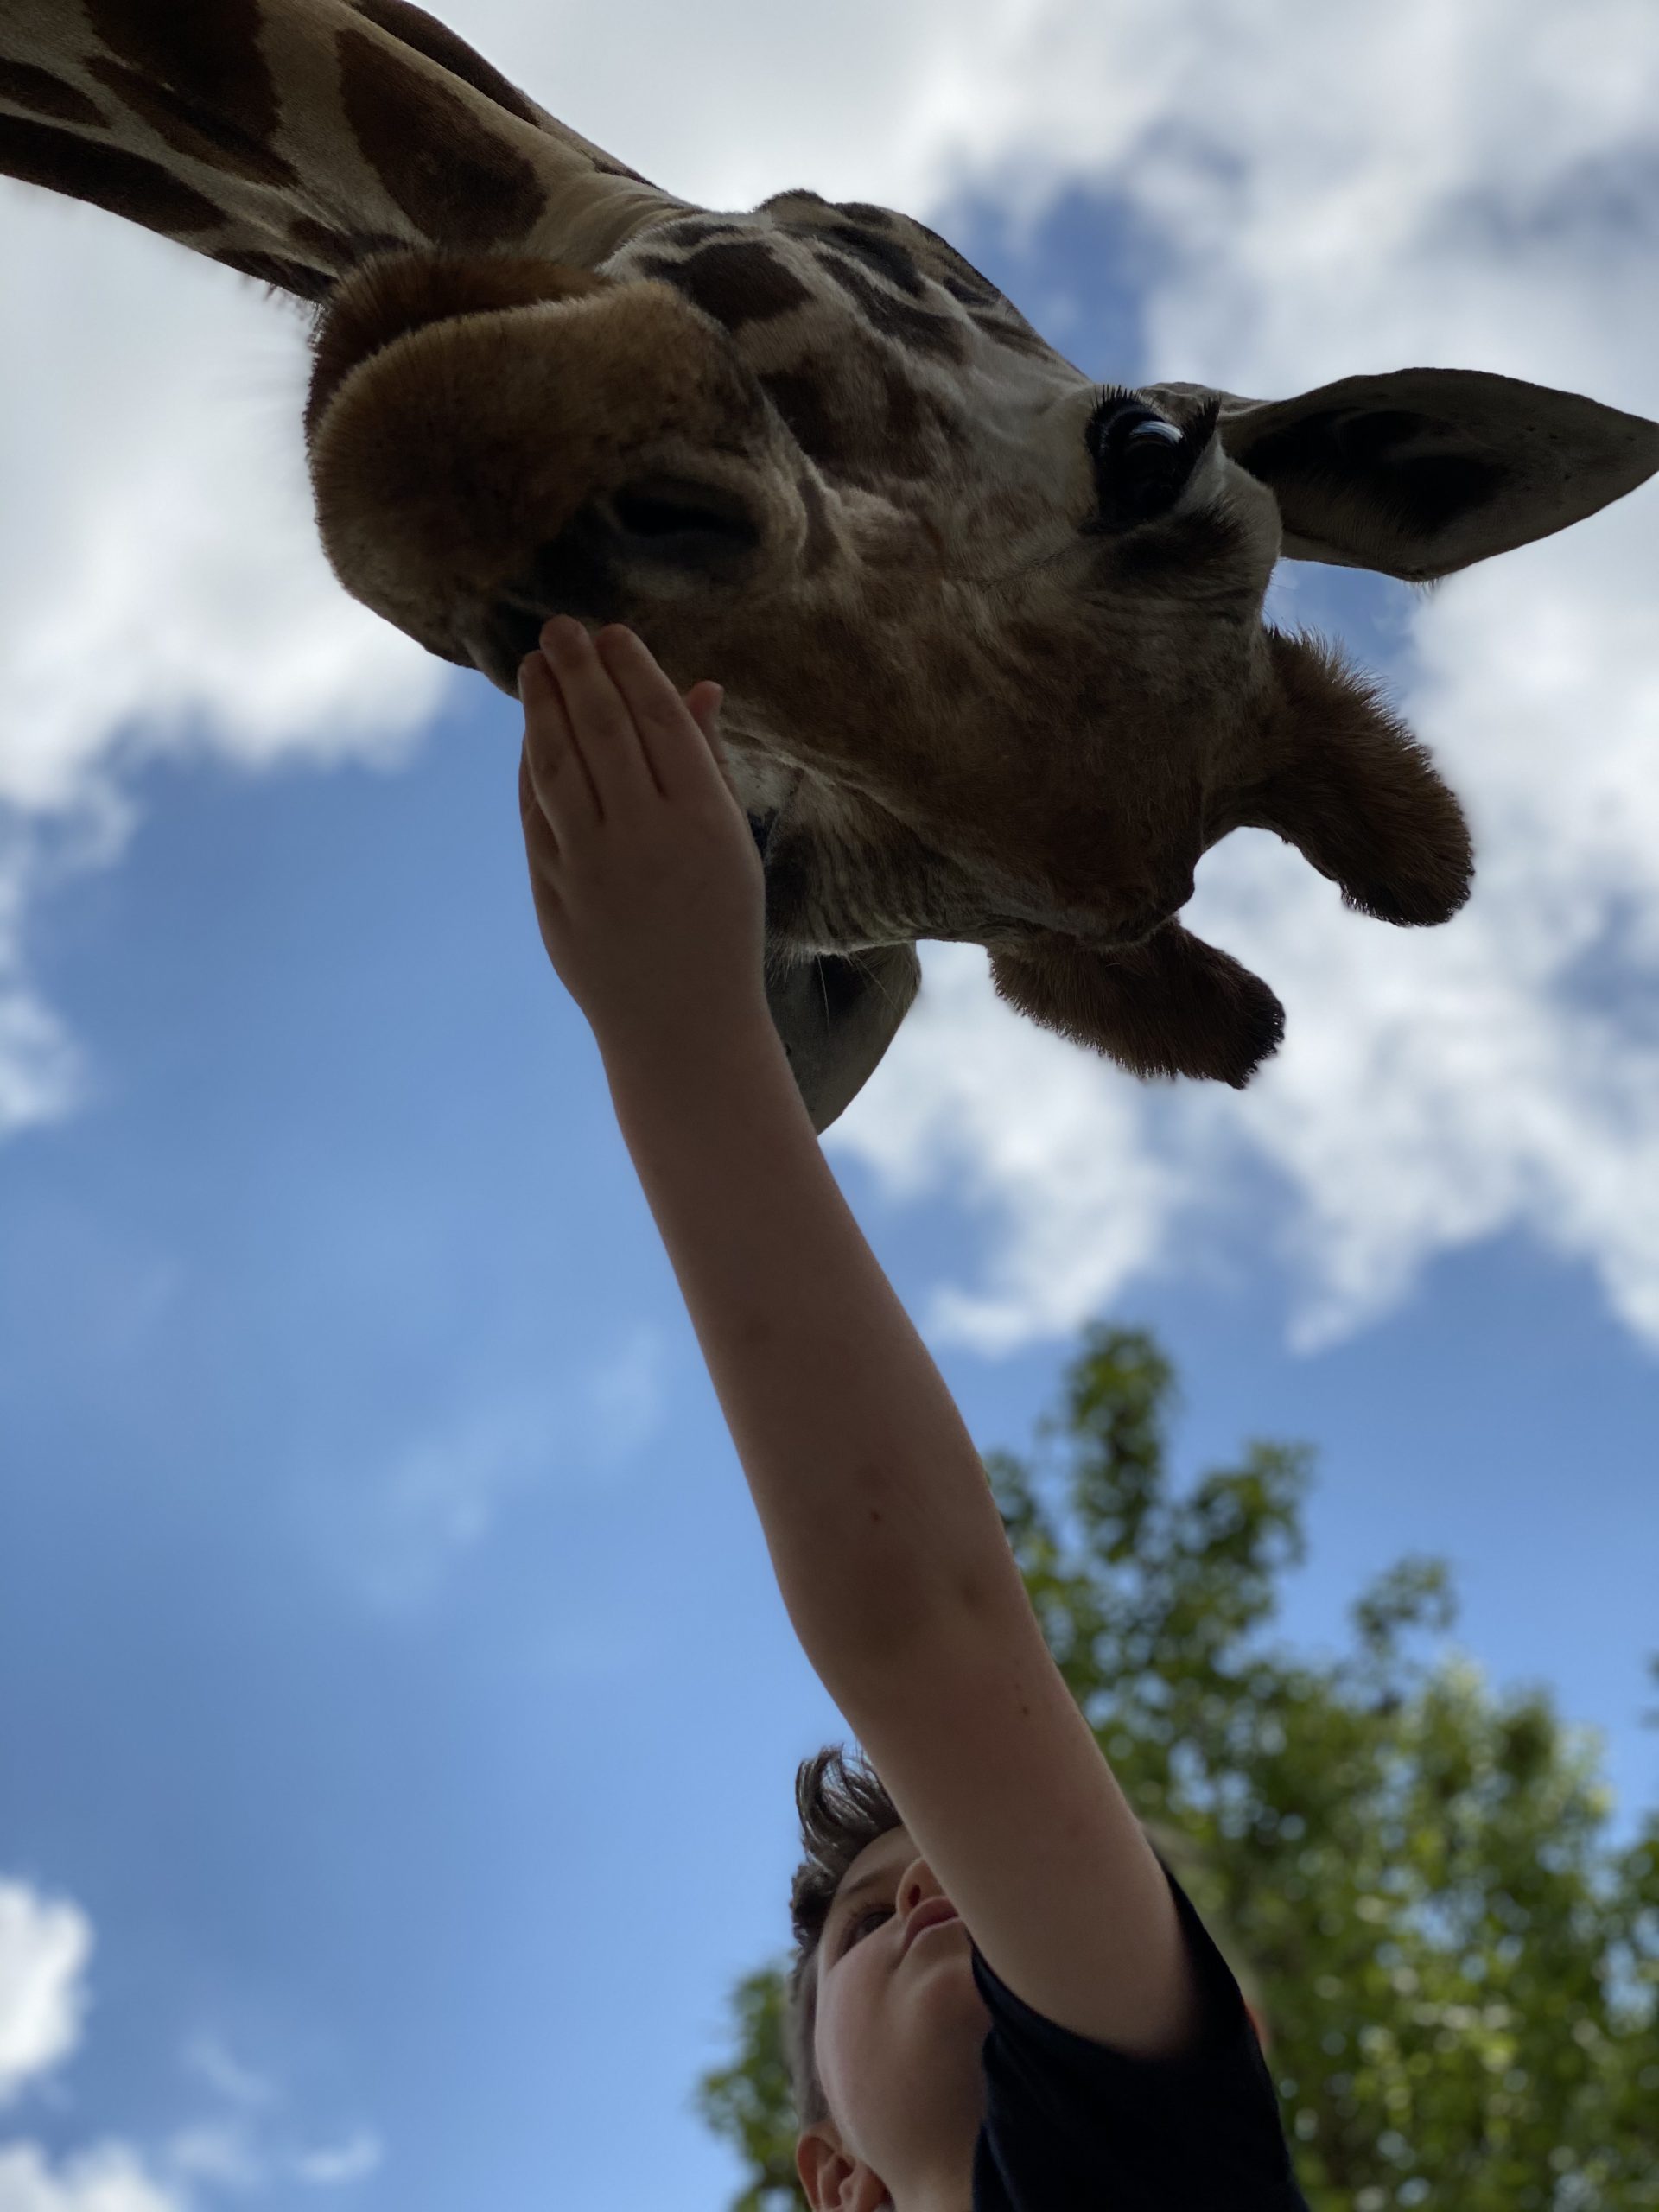 Lazy 5 Ranch - Drive Through Zoo in Mooresville NC - Things to Do With Kids- Day Trips and Family Travel in North Carolina